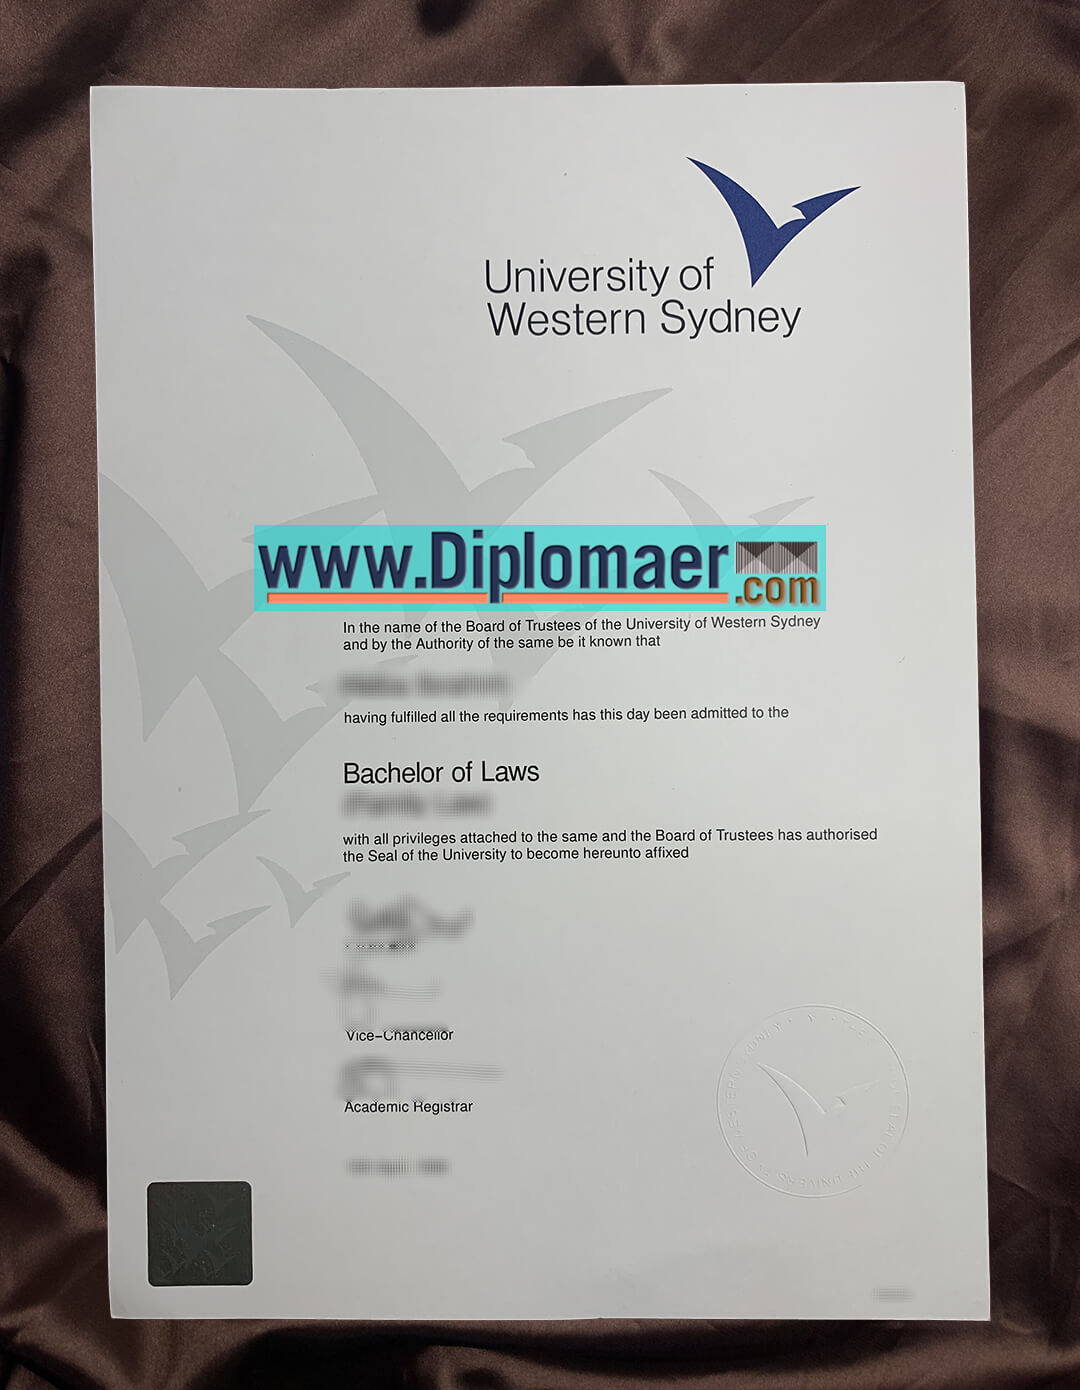 University of Western Sydney Fake Diploma - Where can I Buy an old version of the University of Western Sydney fake certificate?